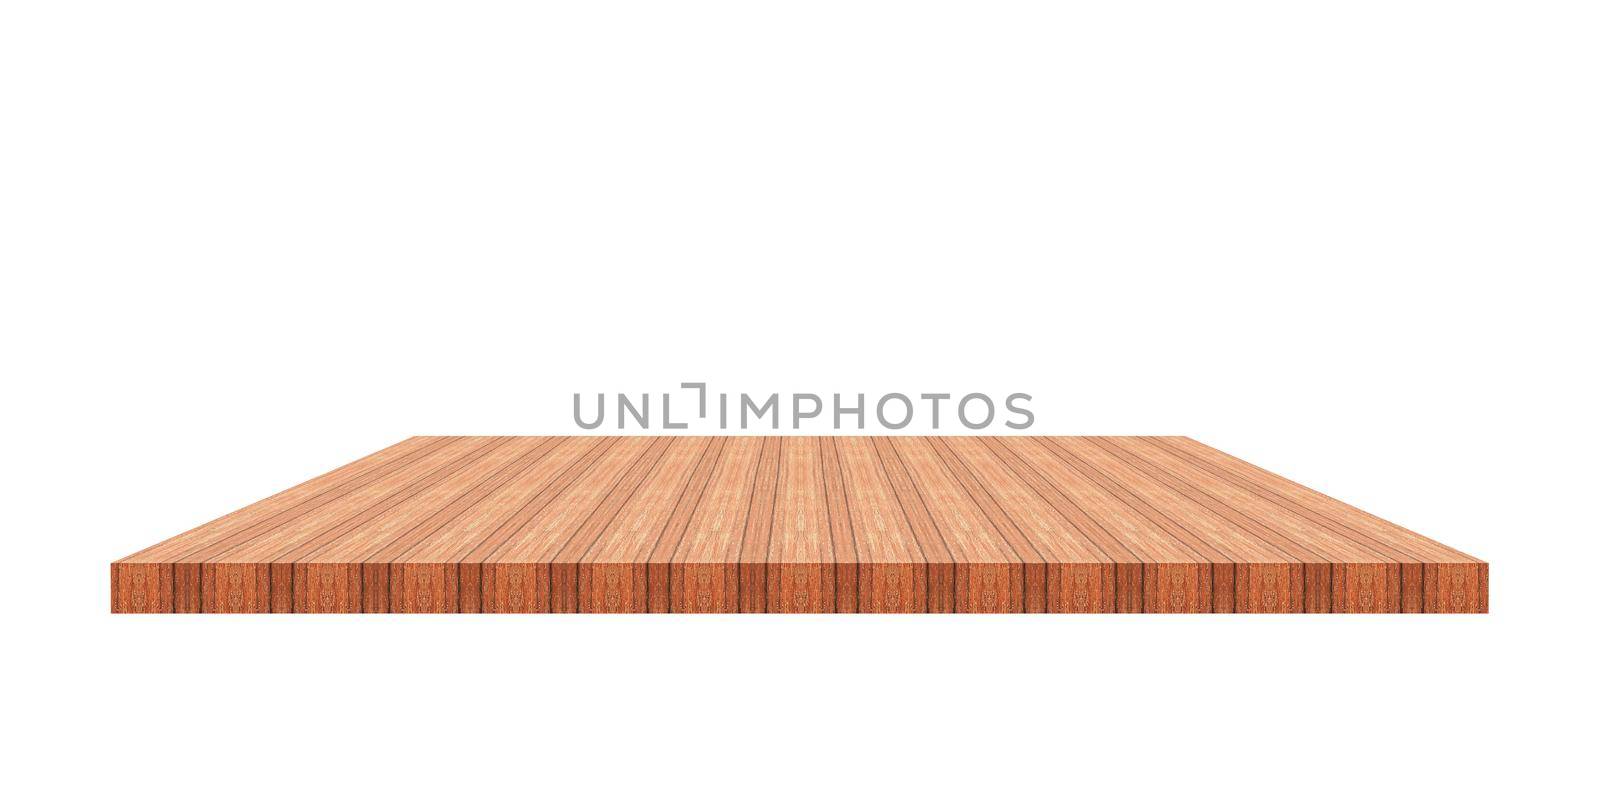 wooden shelves design isolated on white background for your product by pramot